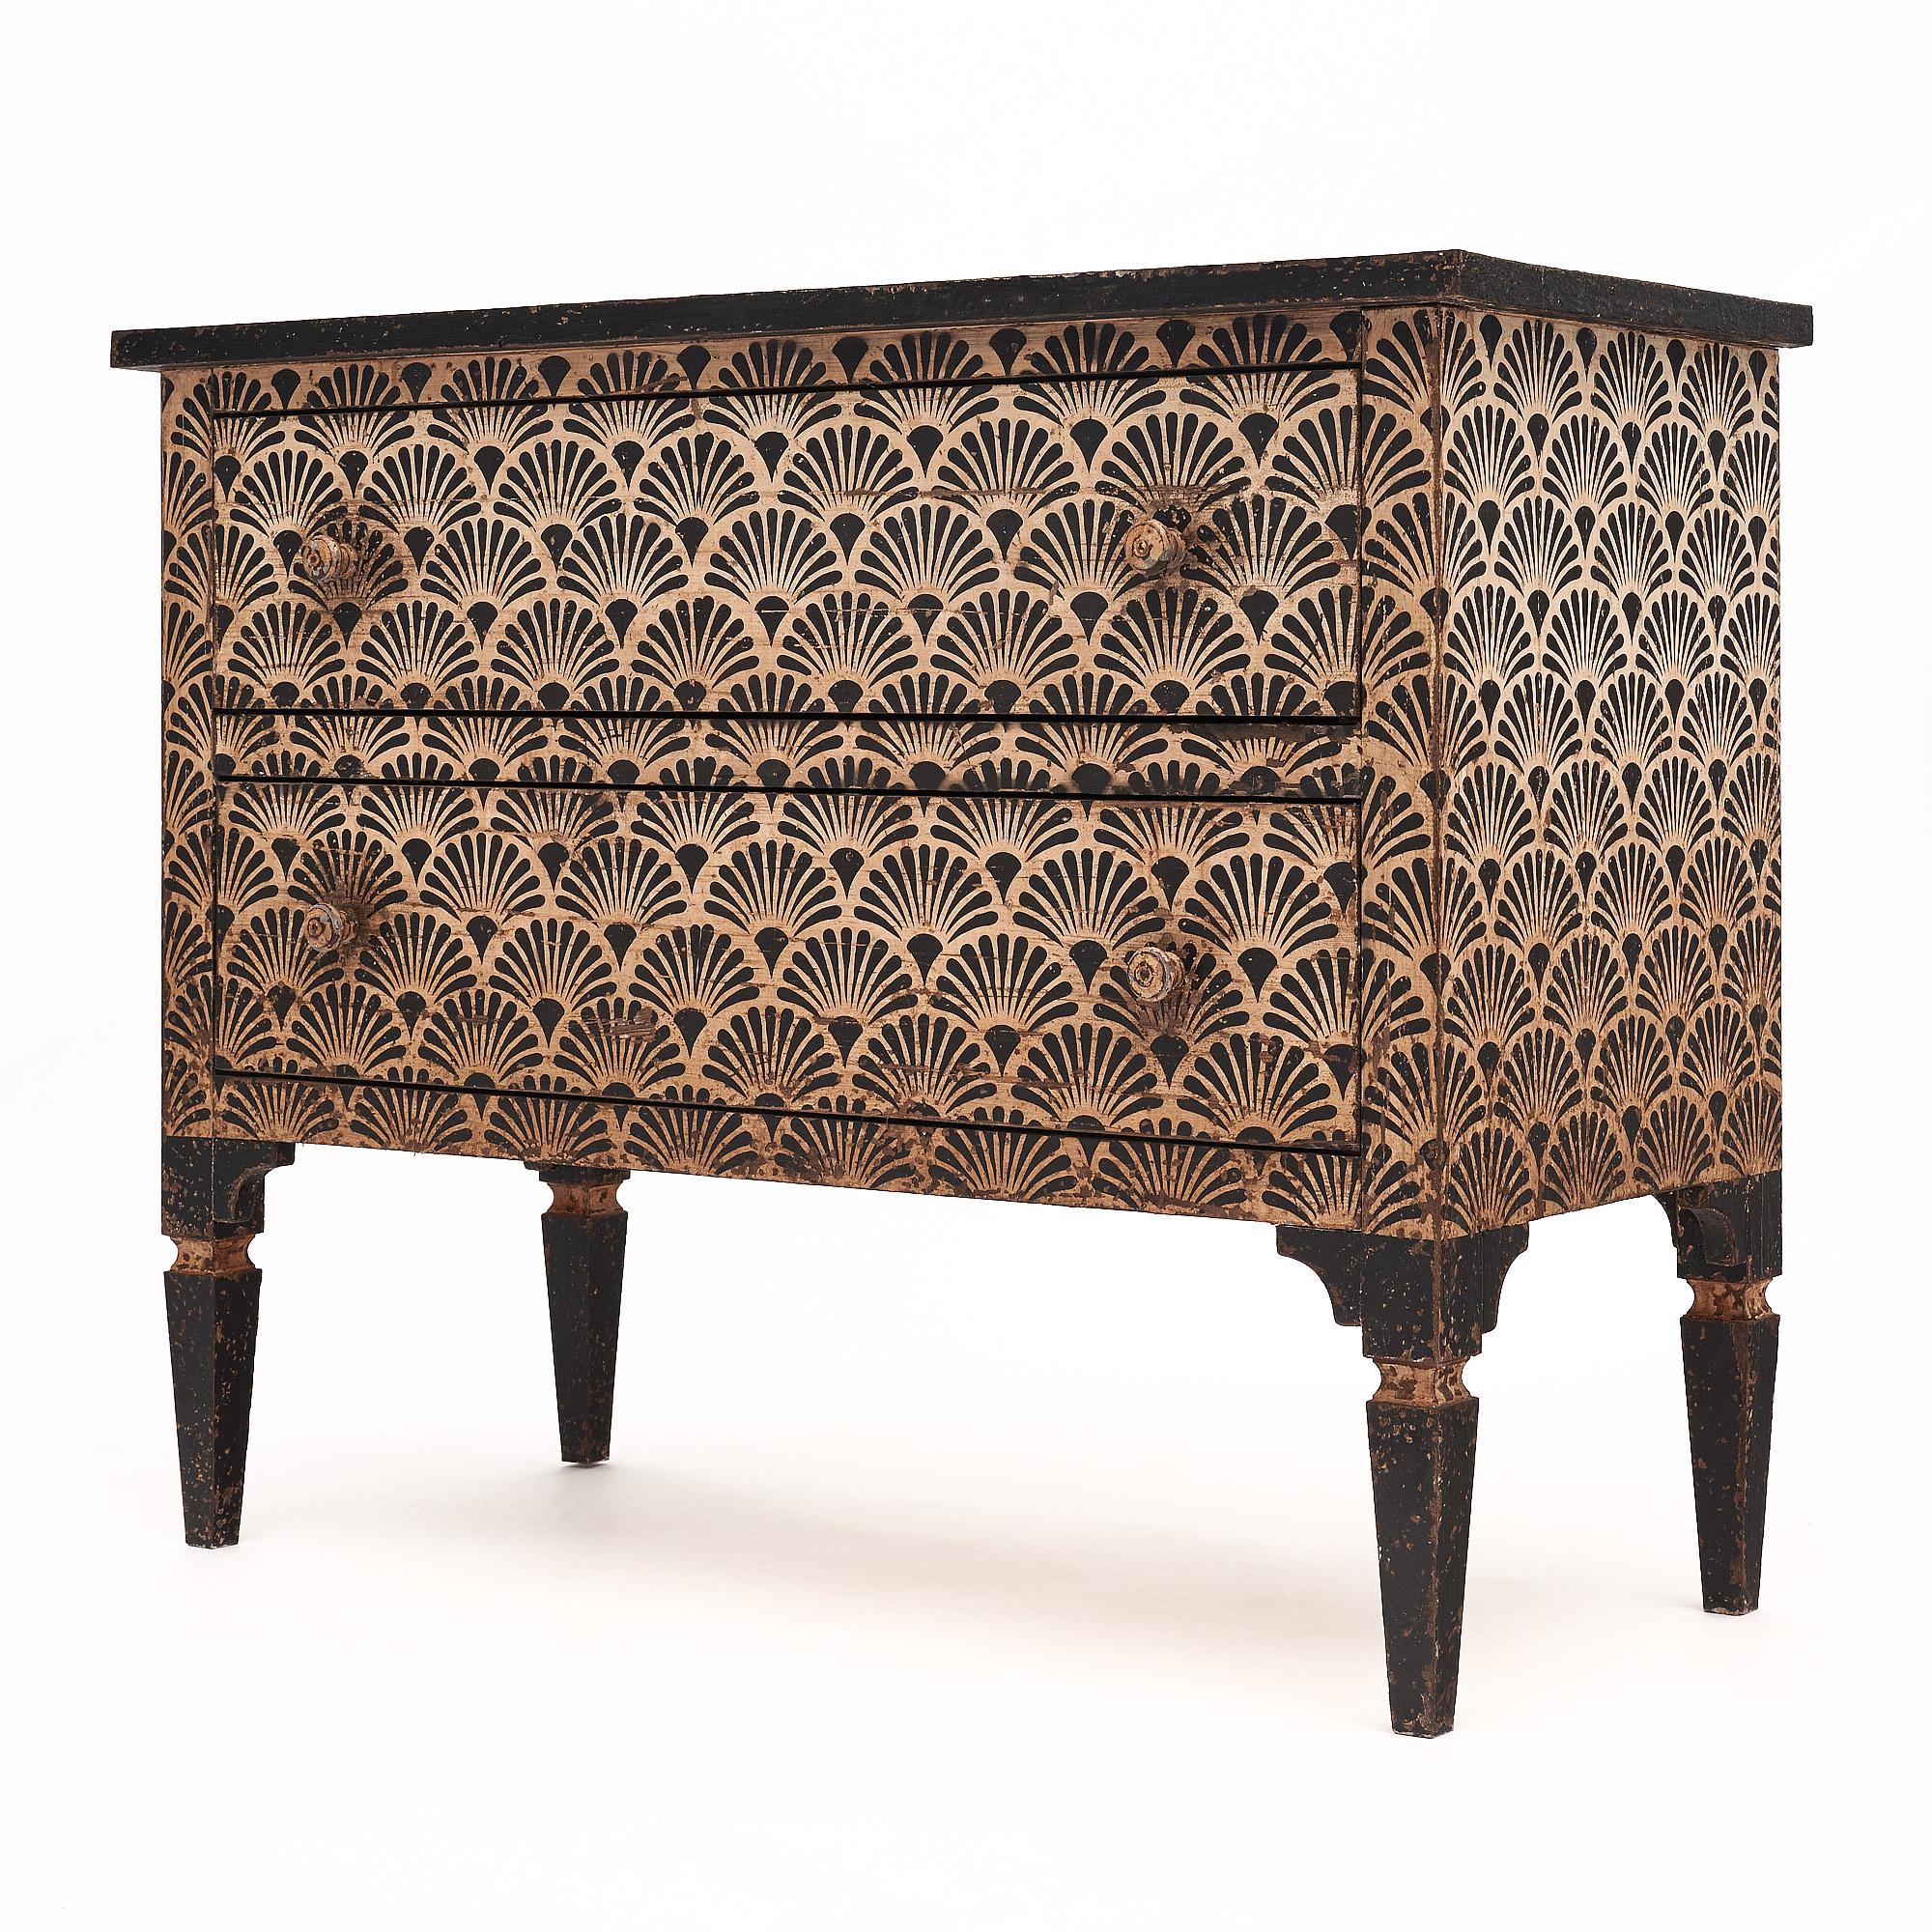 Chest from Italy that features a striking hand-painted design in cream and black tones showcasing a scalloped design. The chest is supported by four tapered legs and has two dovetailed drawers.
